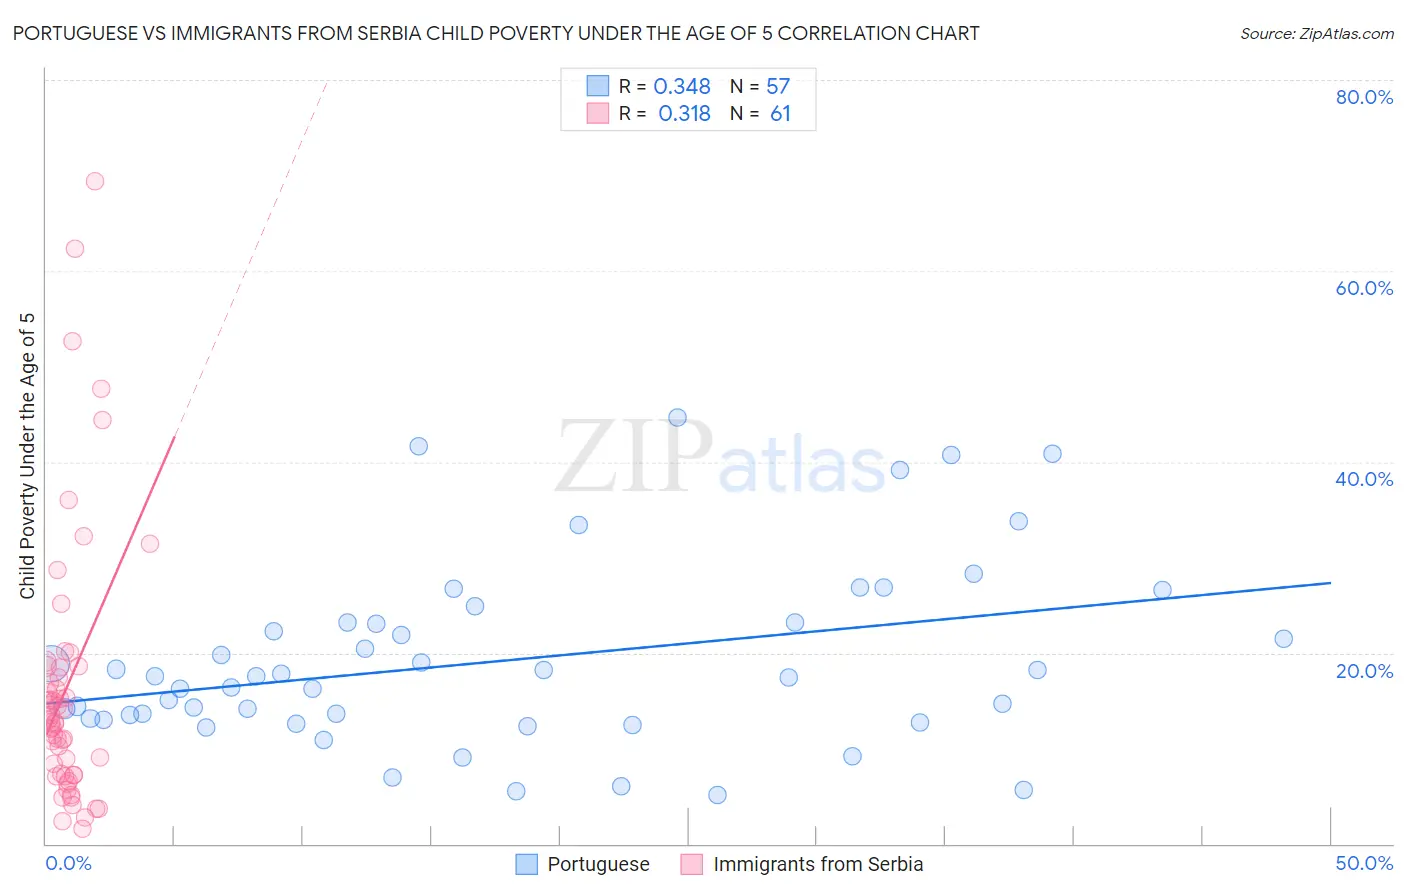 Portuguese vs Immigrants from Serbia Child Poverty Under the Age of 5